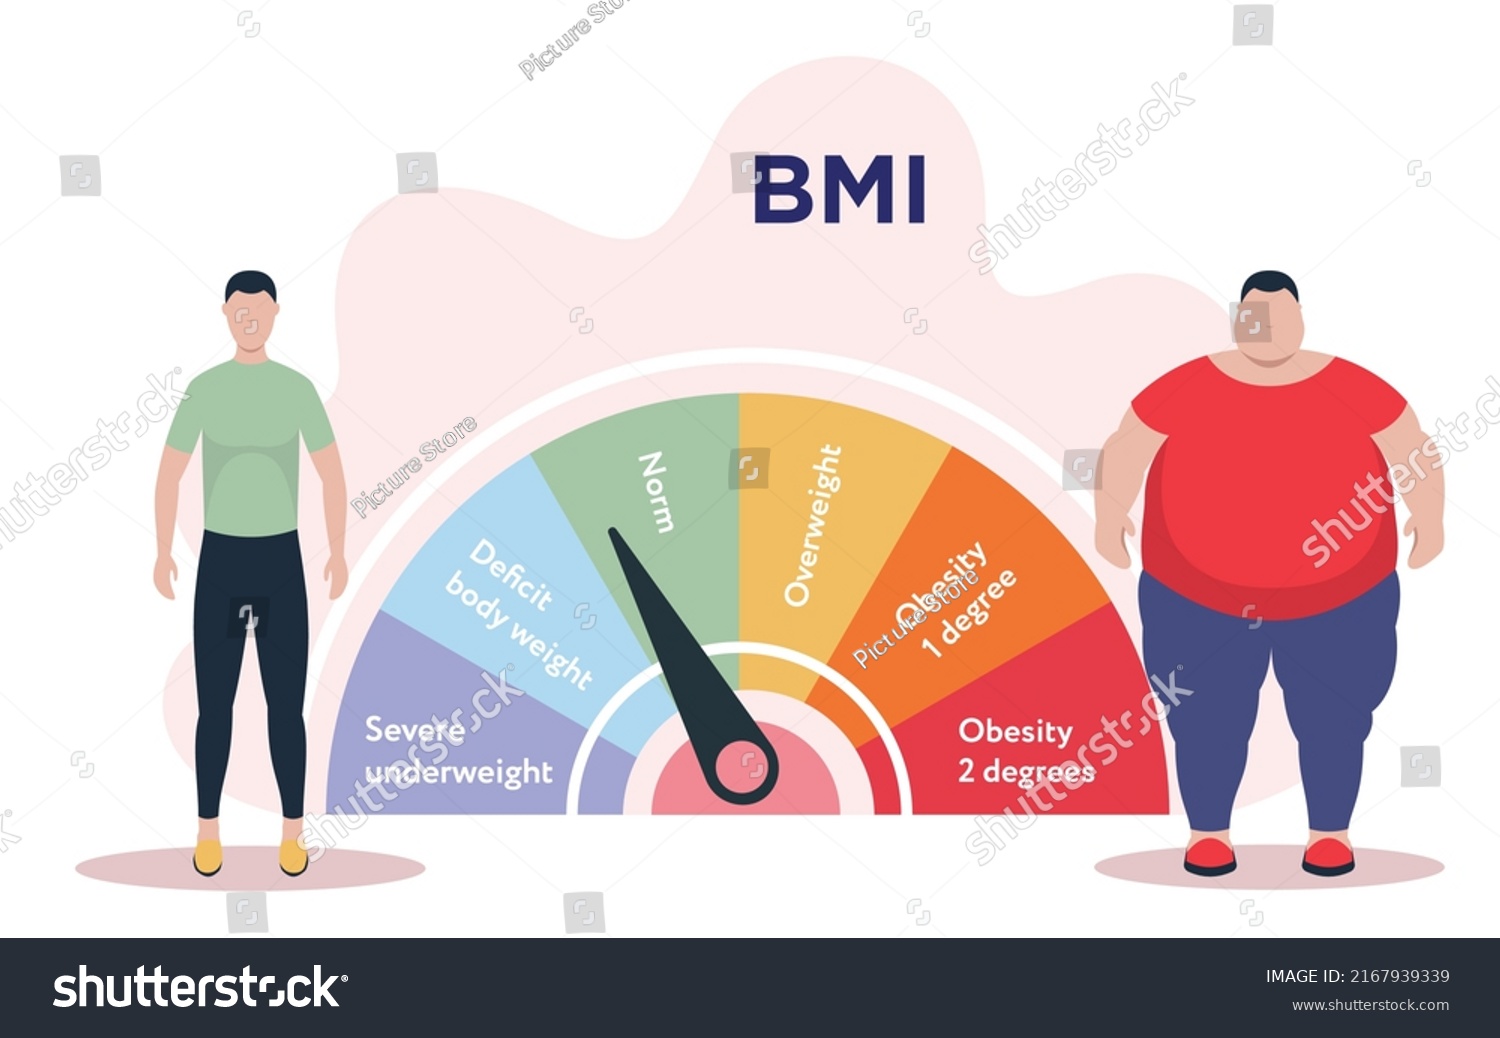 SVG of Body Mass Index. Poster in flat design. Vector illustration. Person with normal weight and obese man standing near BMI scale svg